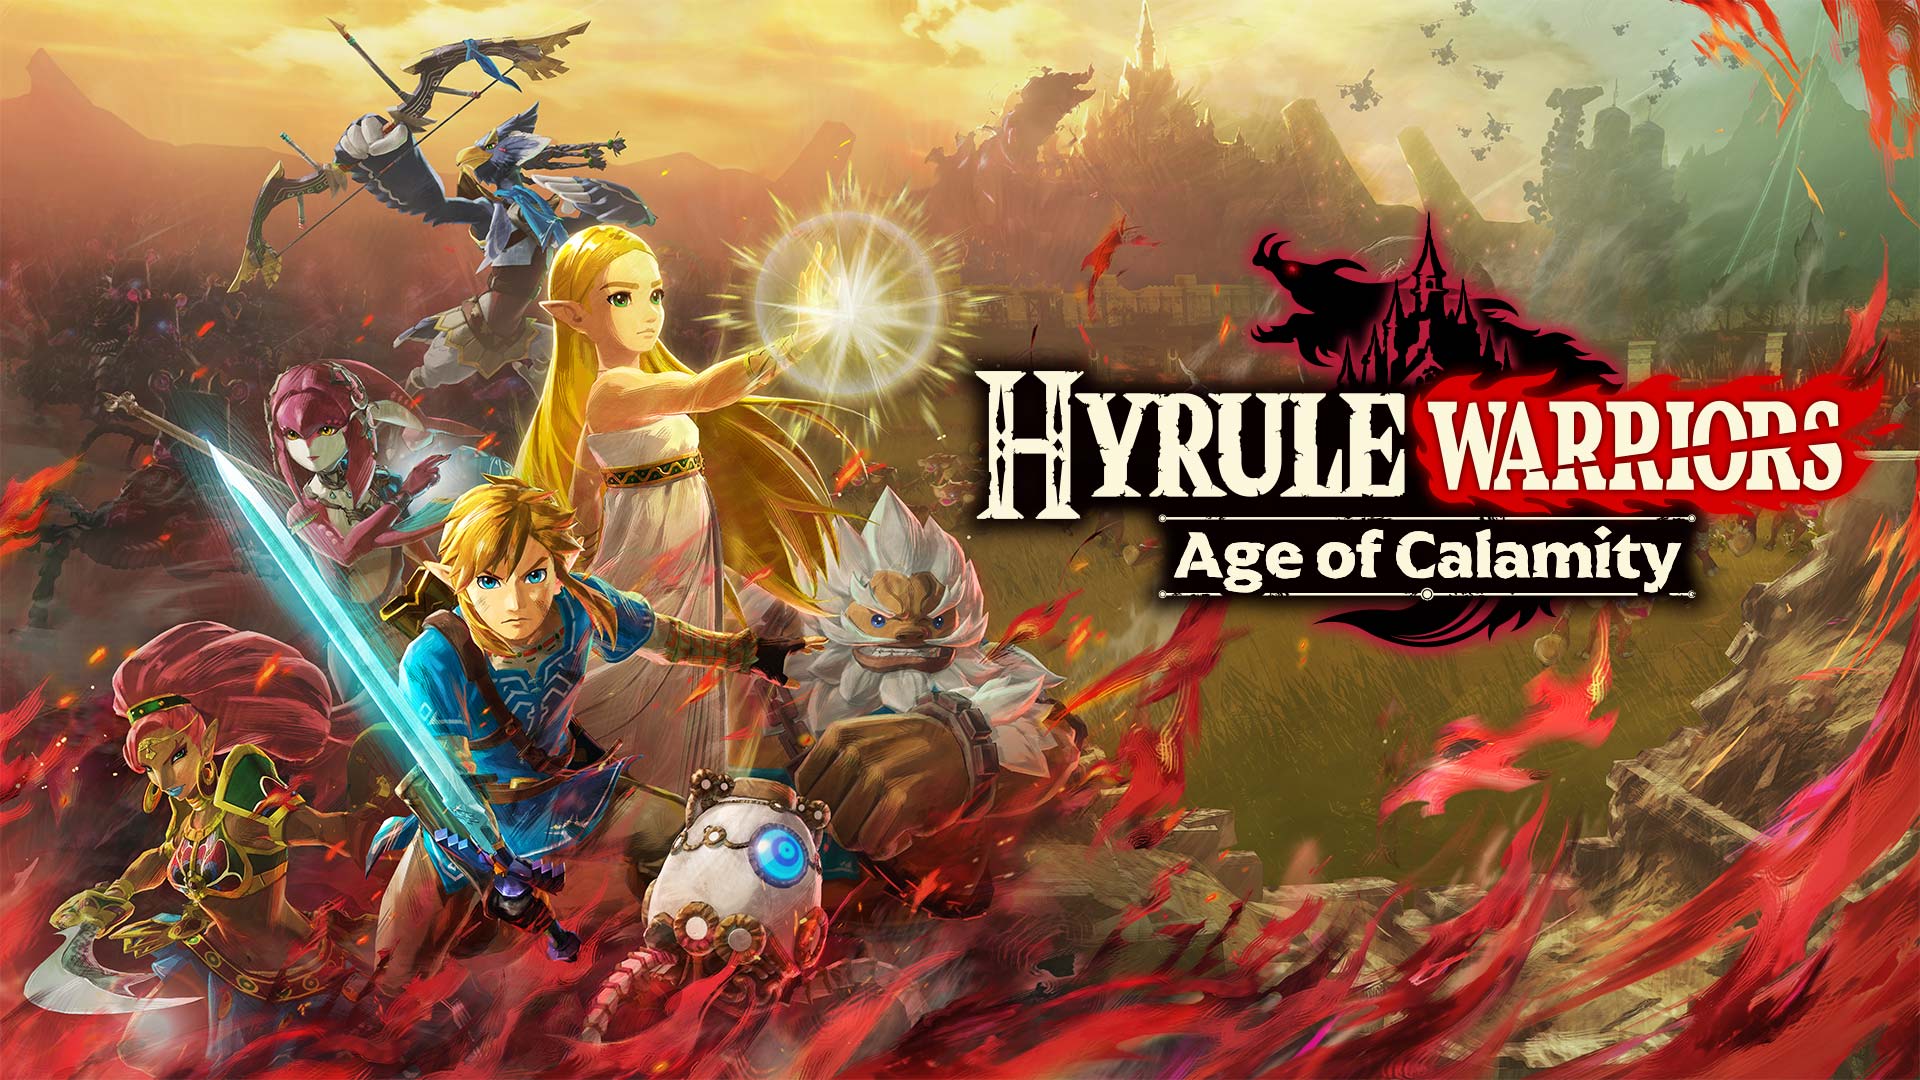 Hyrule-Warriors-Age-of-Calamity-09-08-2020